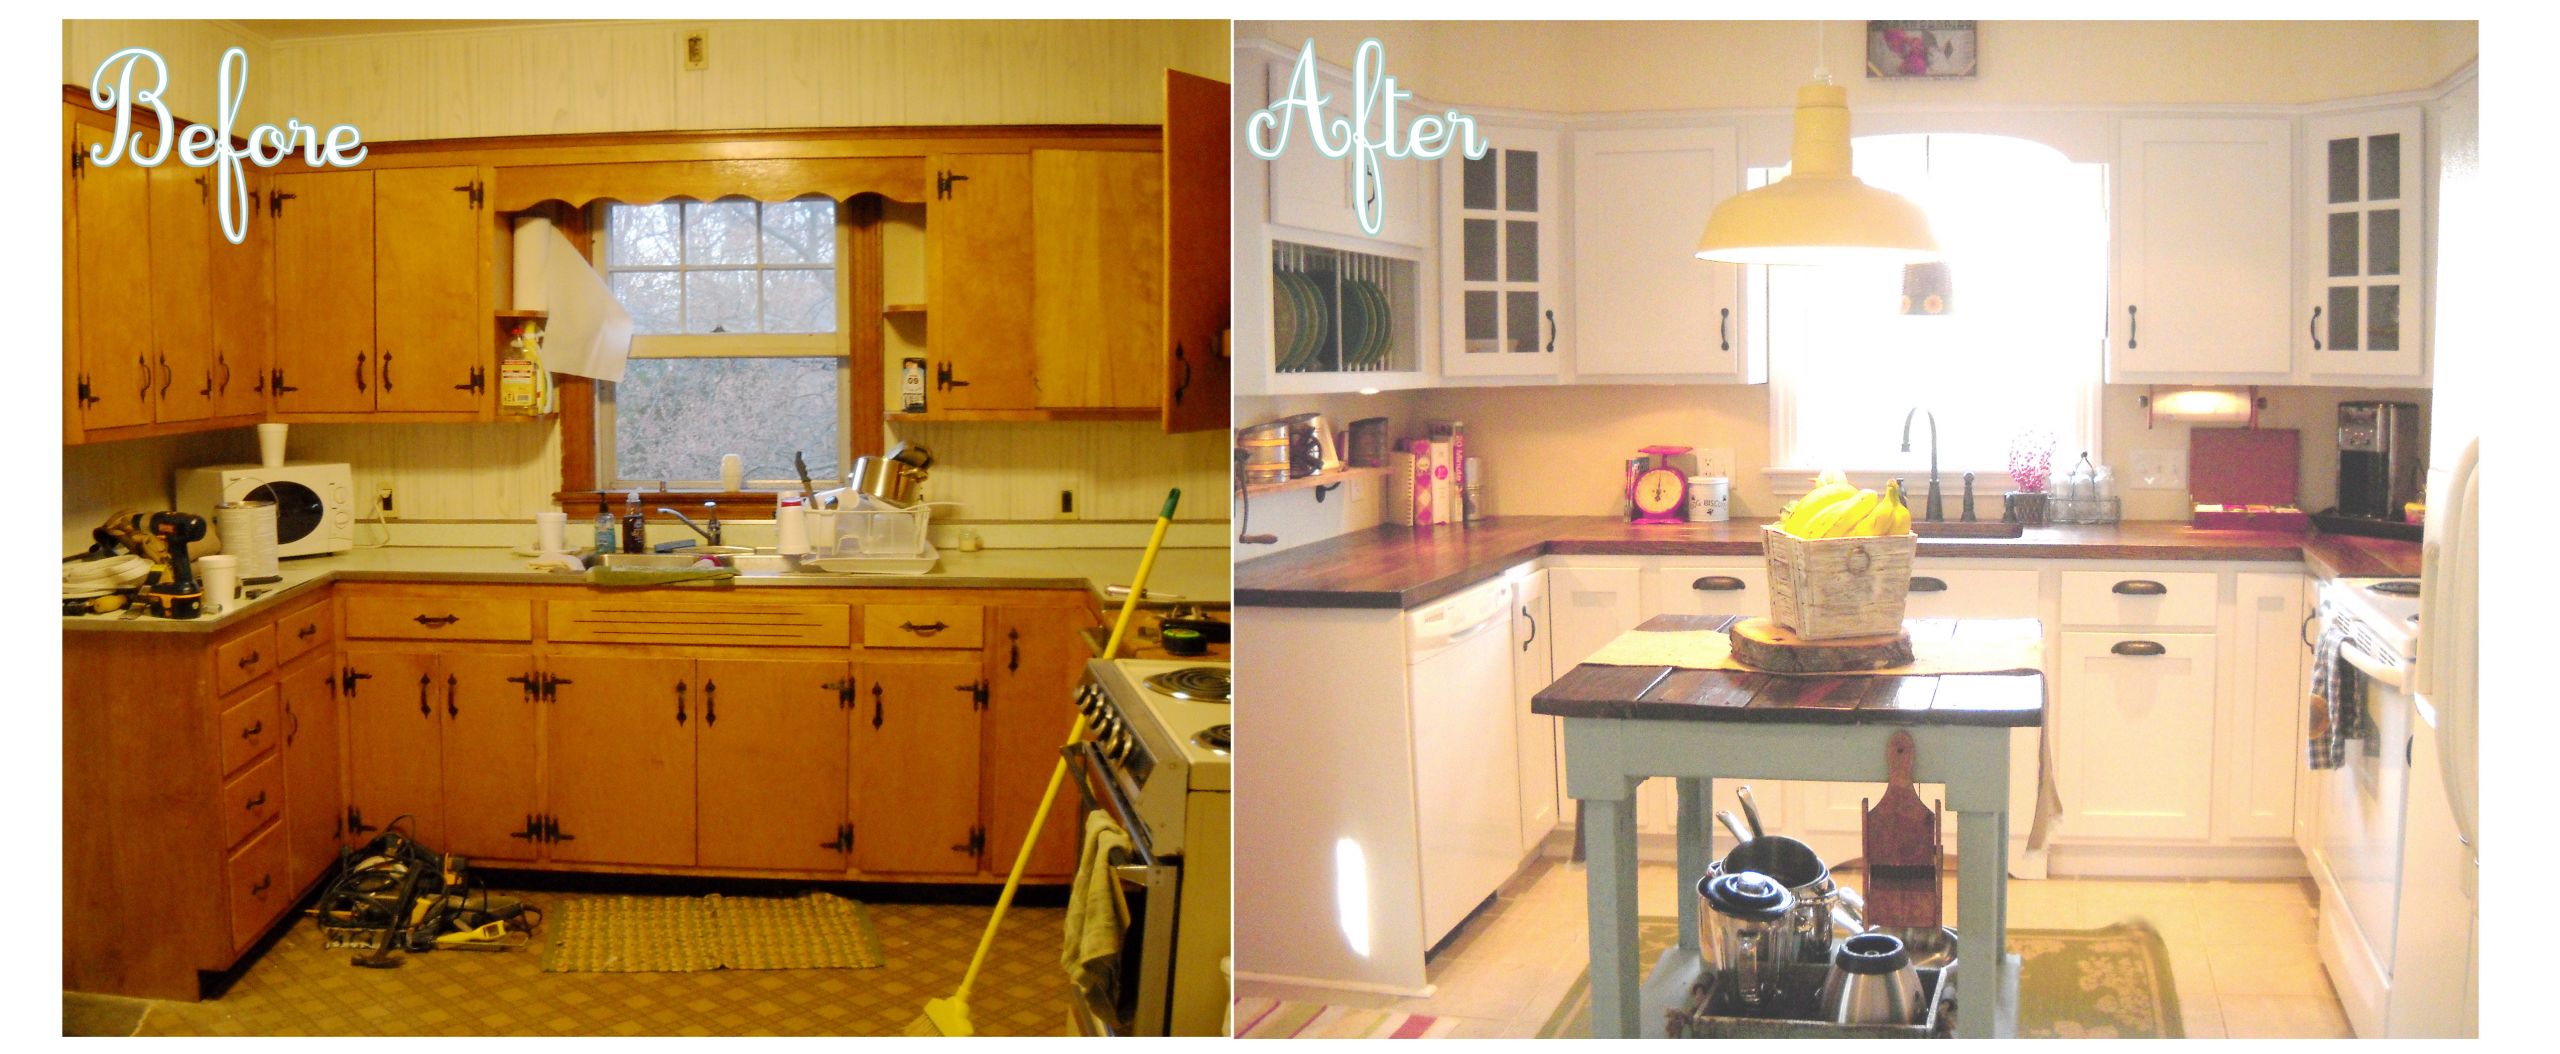 Remodeling Kitchen Before And After
 Get the Fresh and Cool Outlook Inspiration with Kitchen